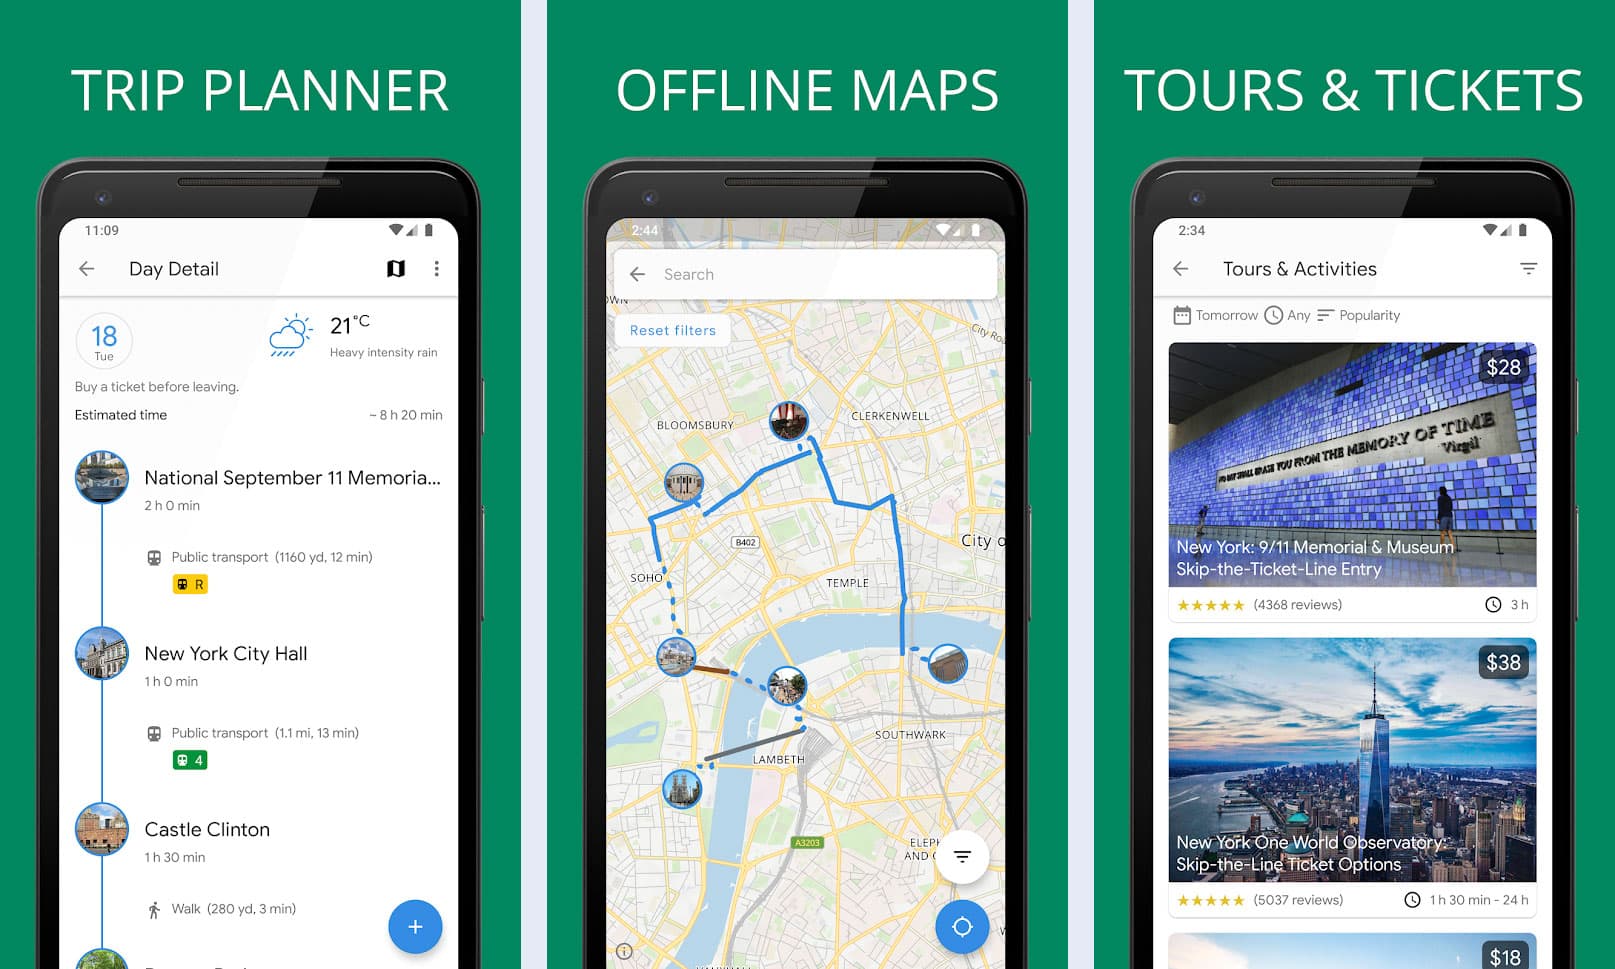  Trip planning apps for different types of trips, including city guides, offline maps, and tours and activities.